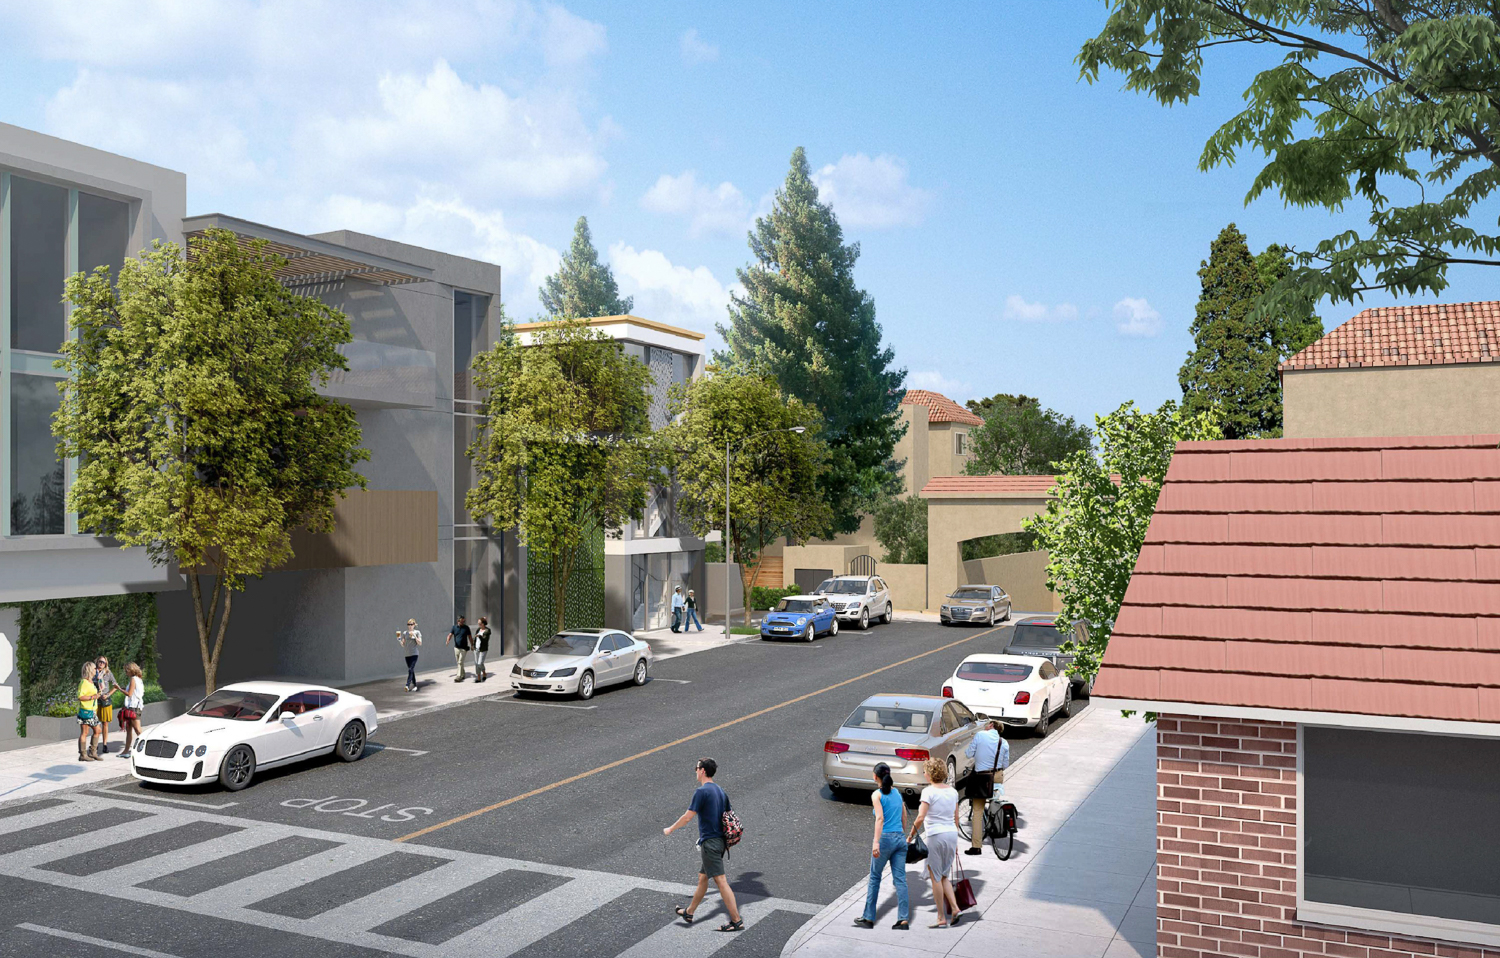 123 Sherman Avenue seen from Grant Avenue and Park Boulevard, rendering by KSH Architects